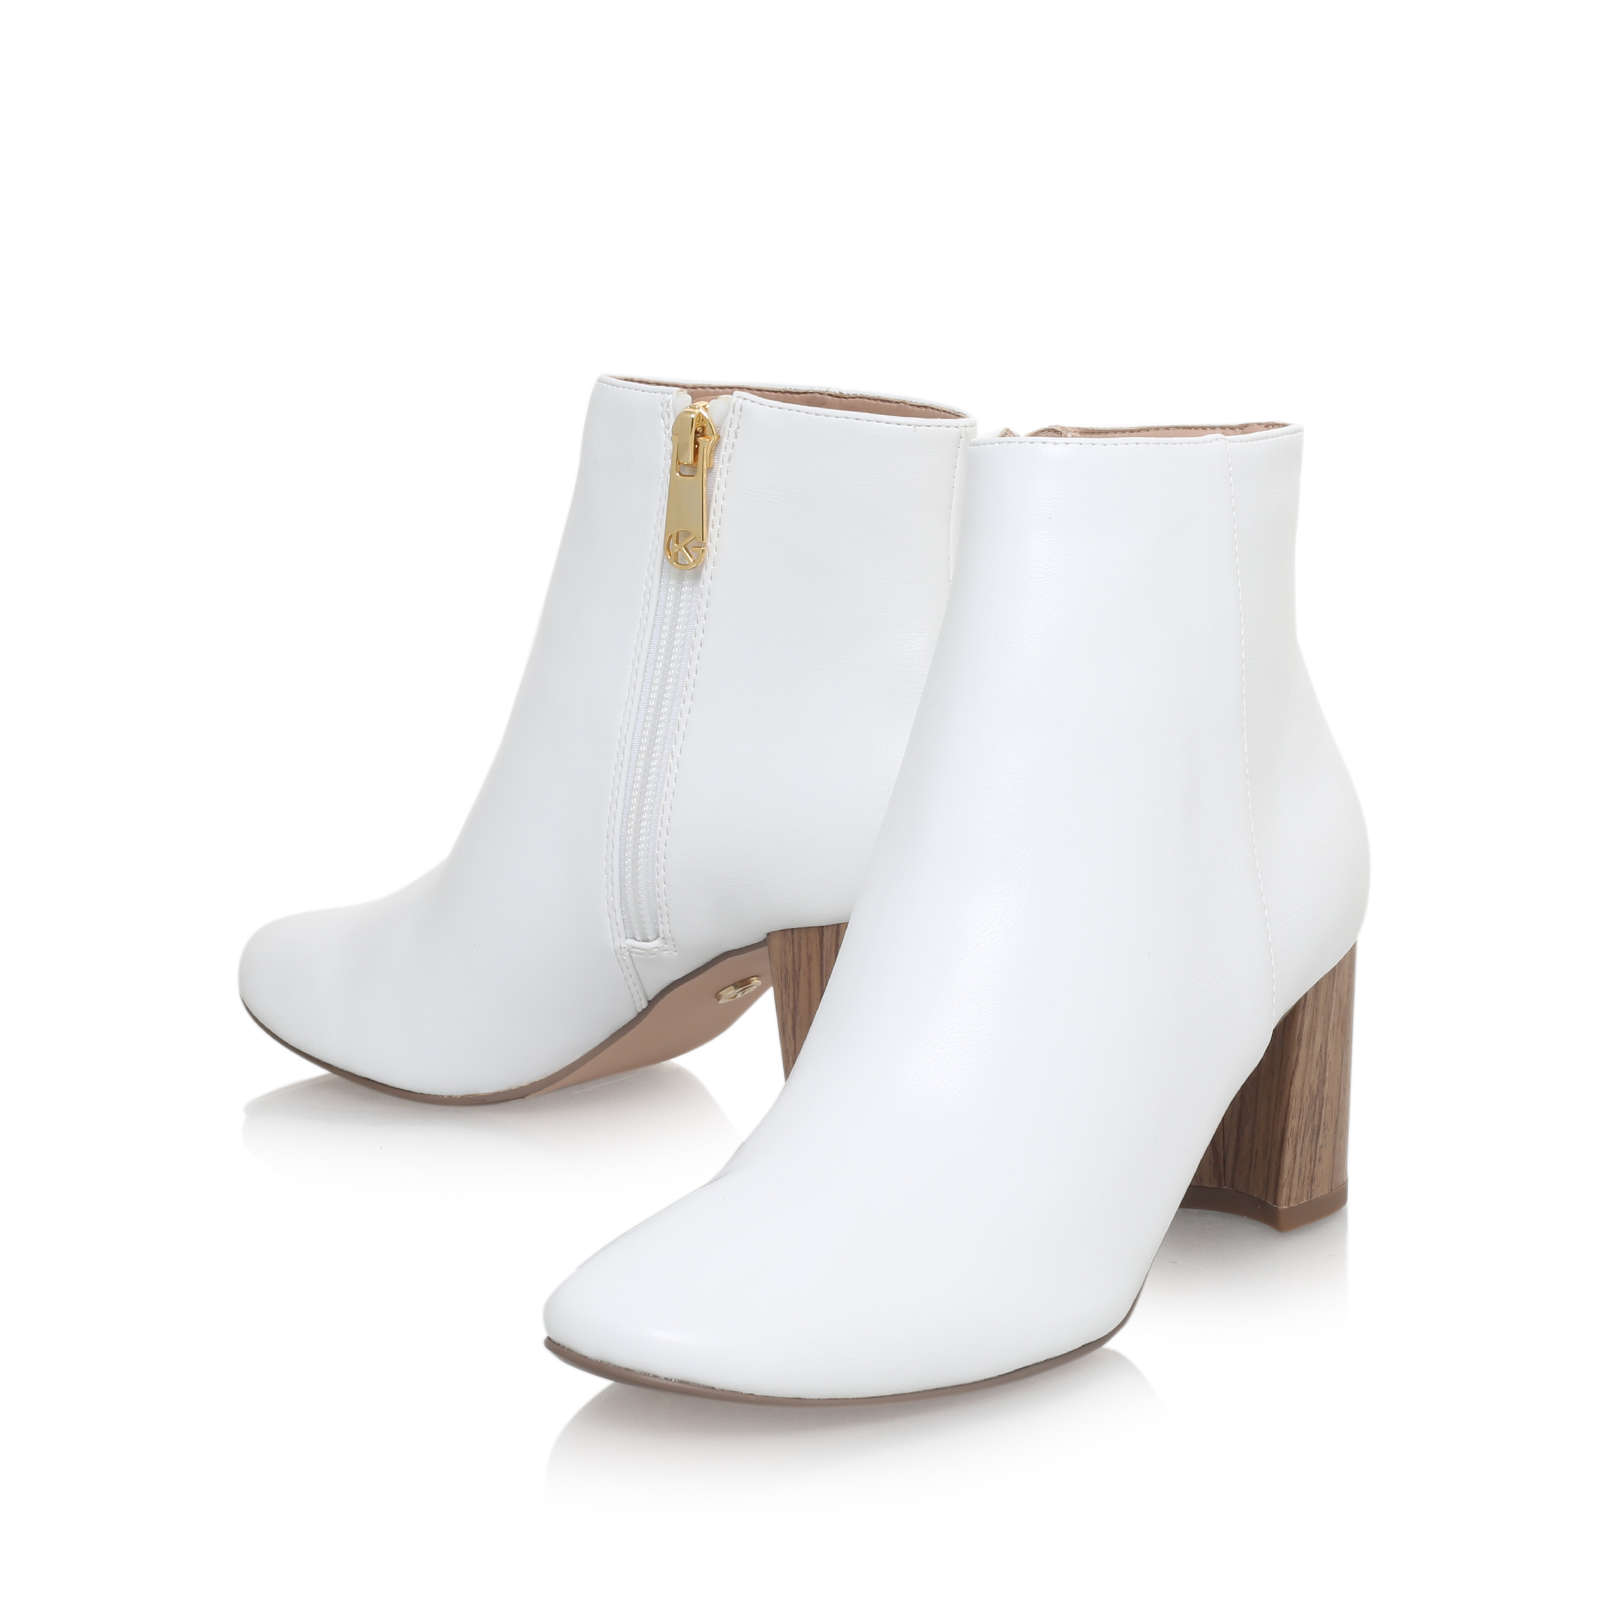 kurt geiger white ankle boots